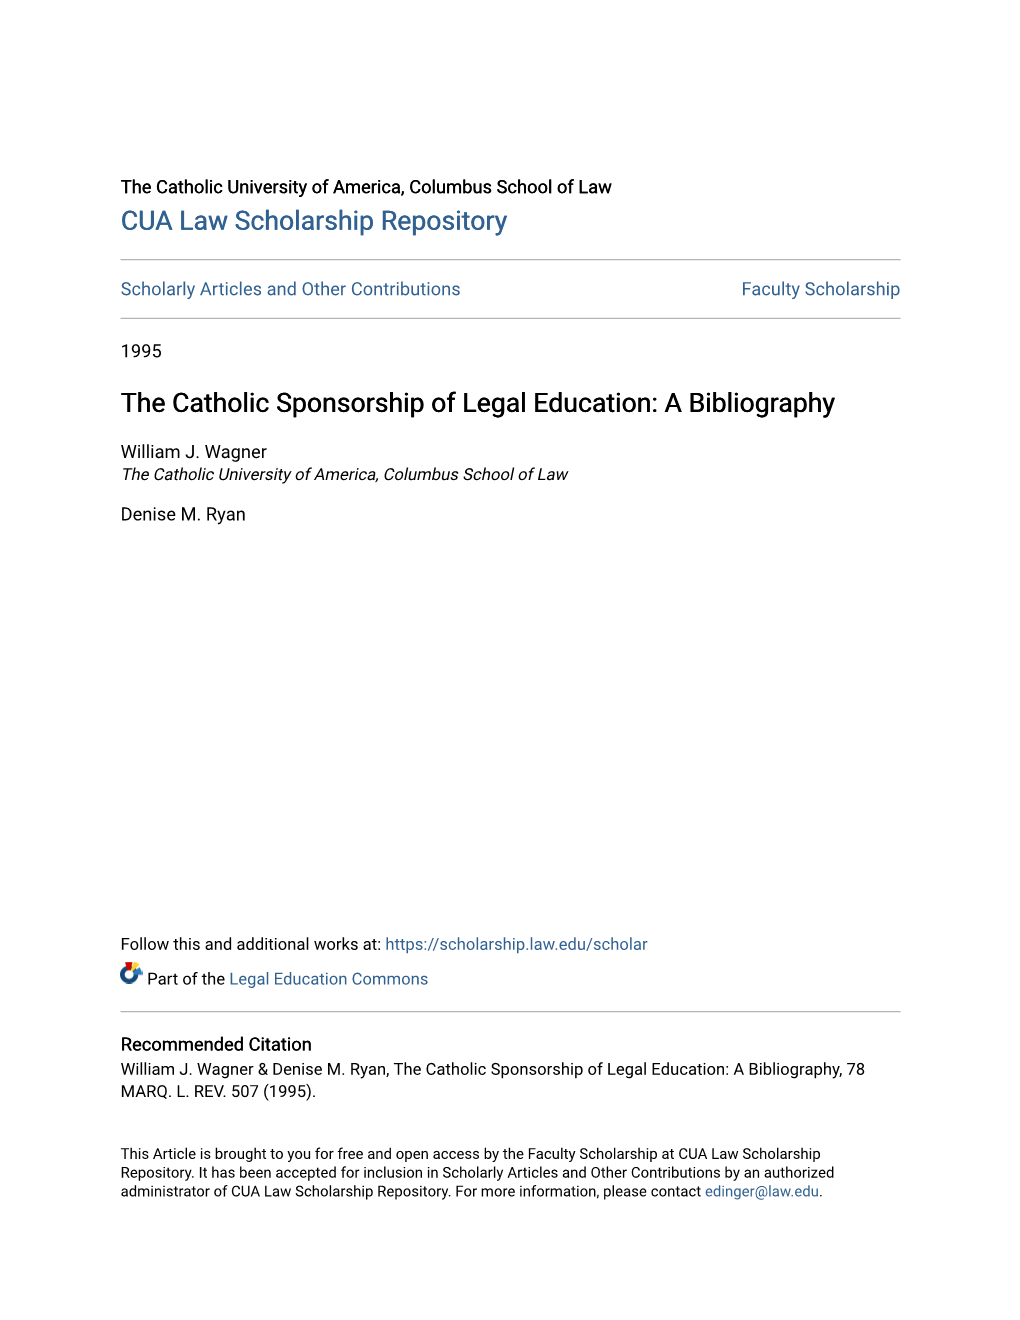 The Catholic Sponsorship of Legal Education: a Bibliography